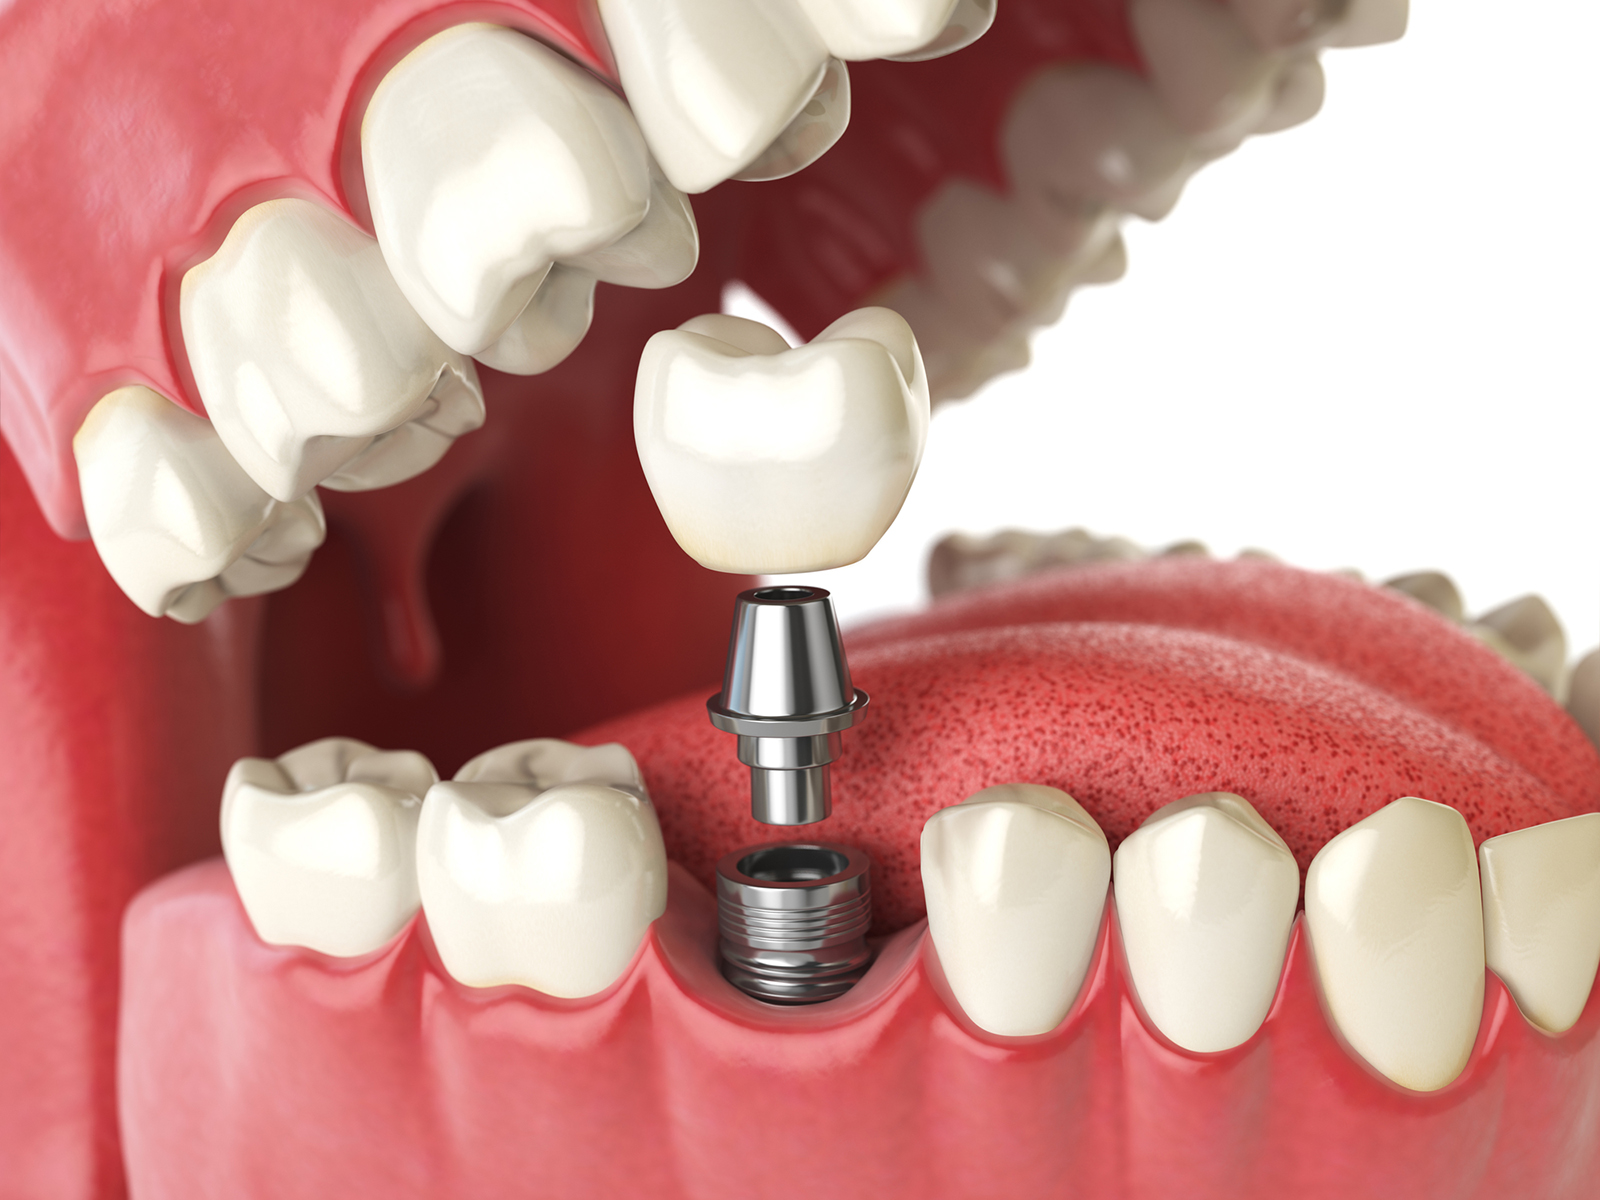 Can front teeth be implanted?